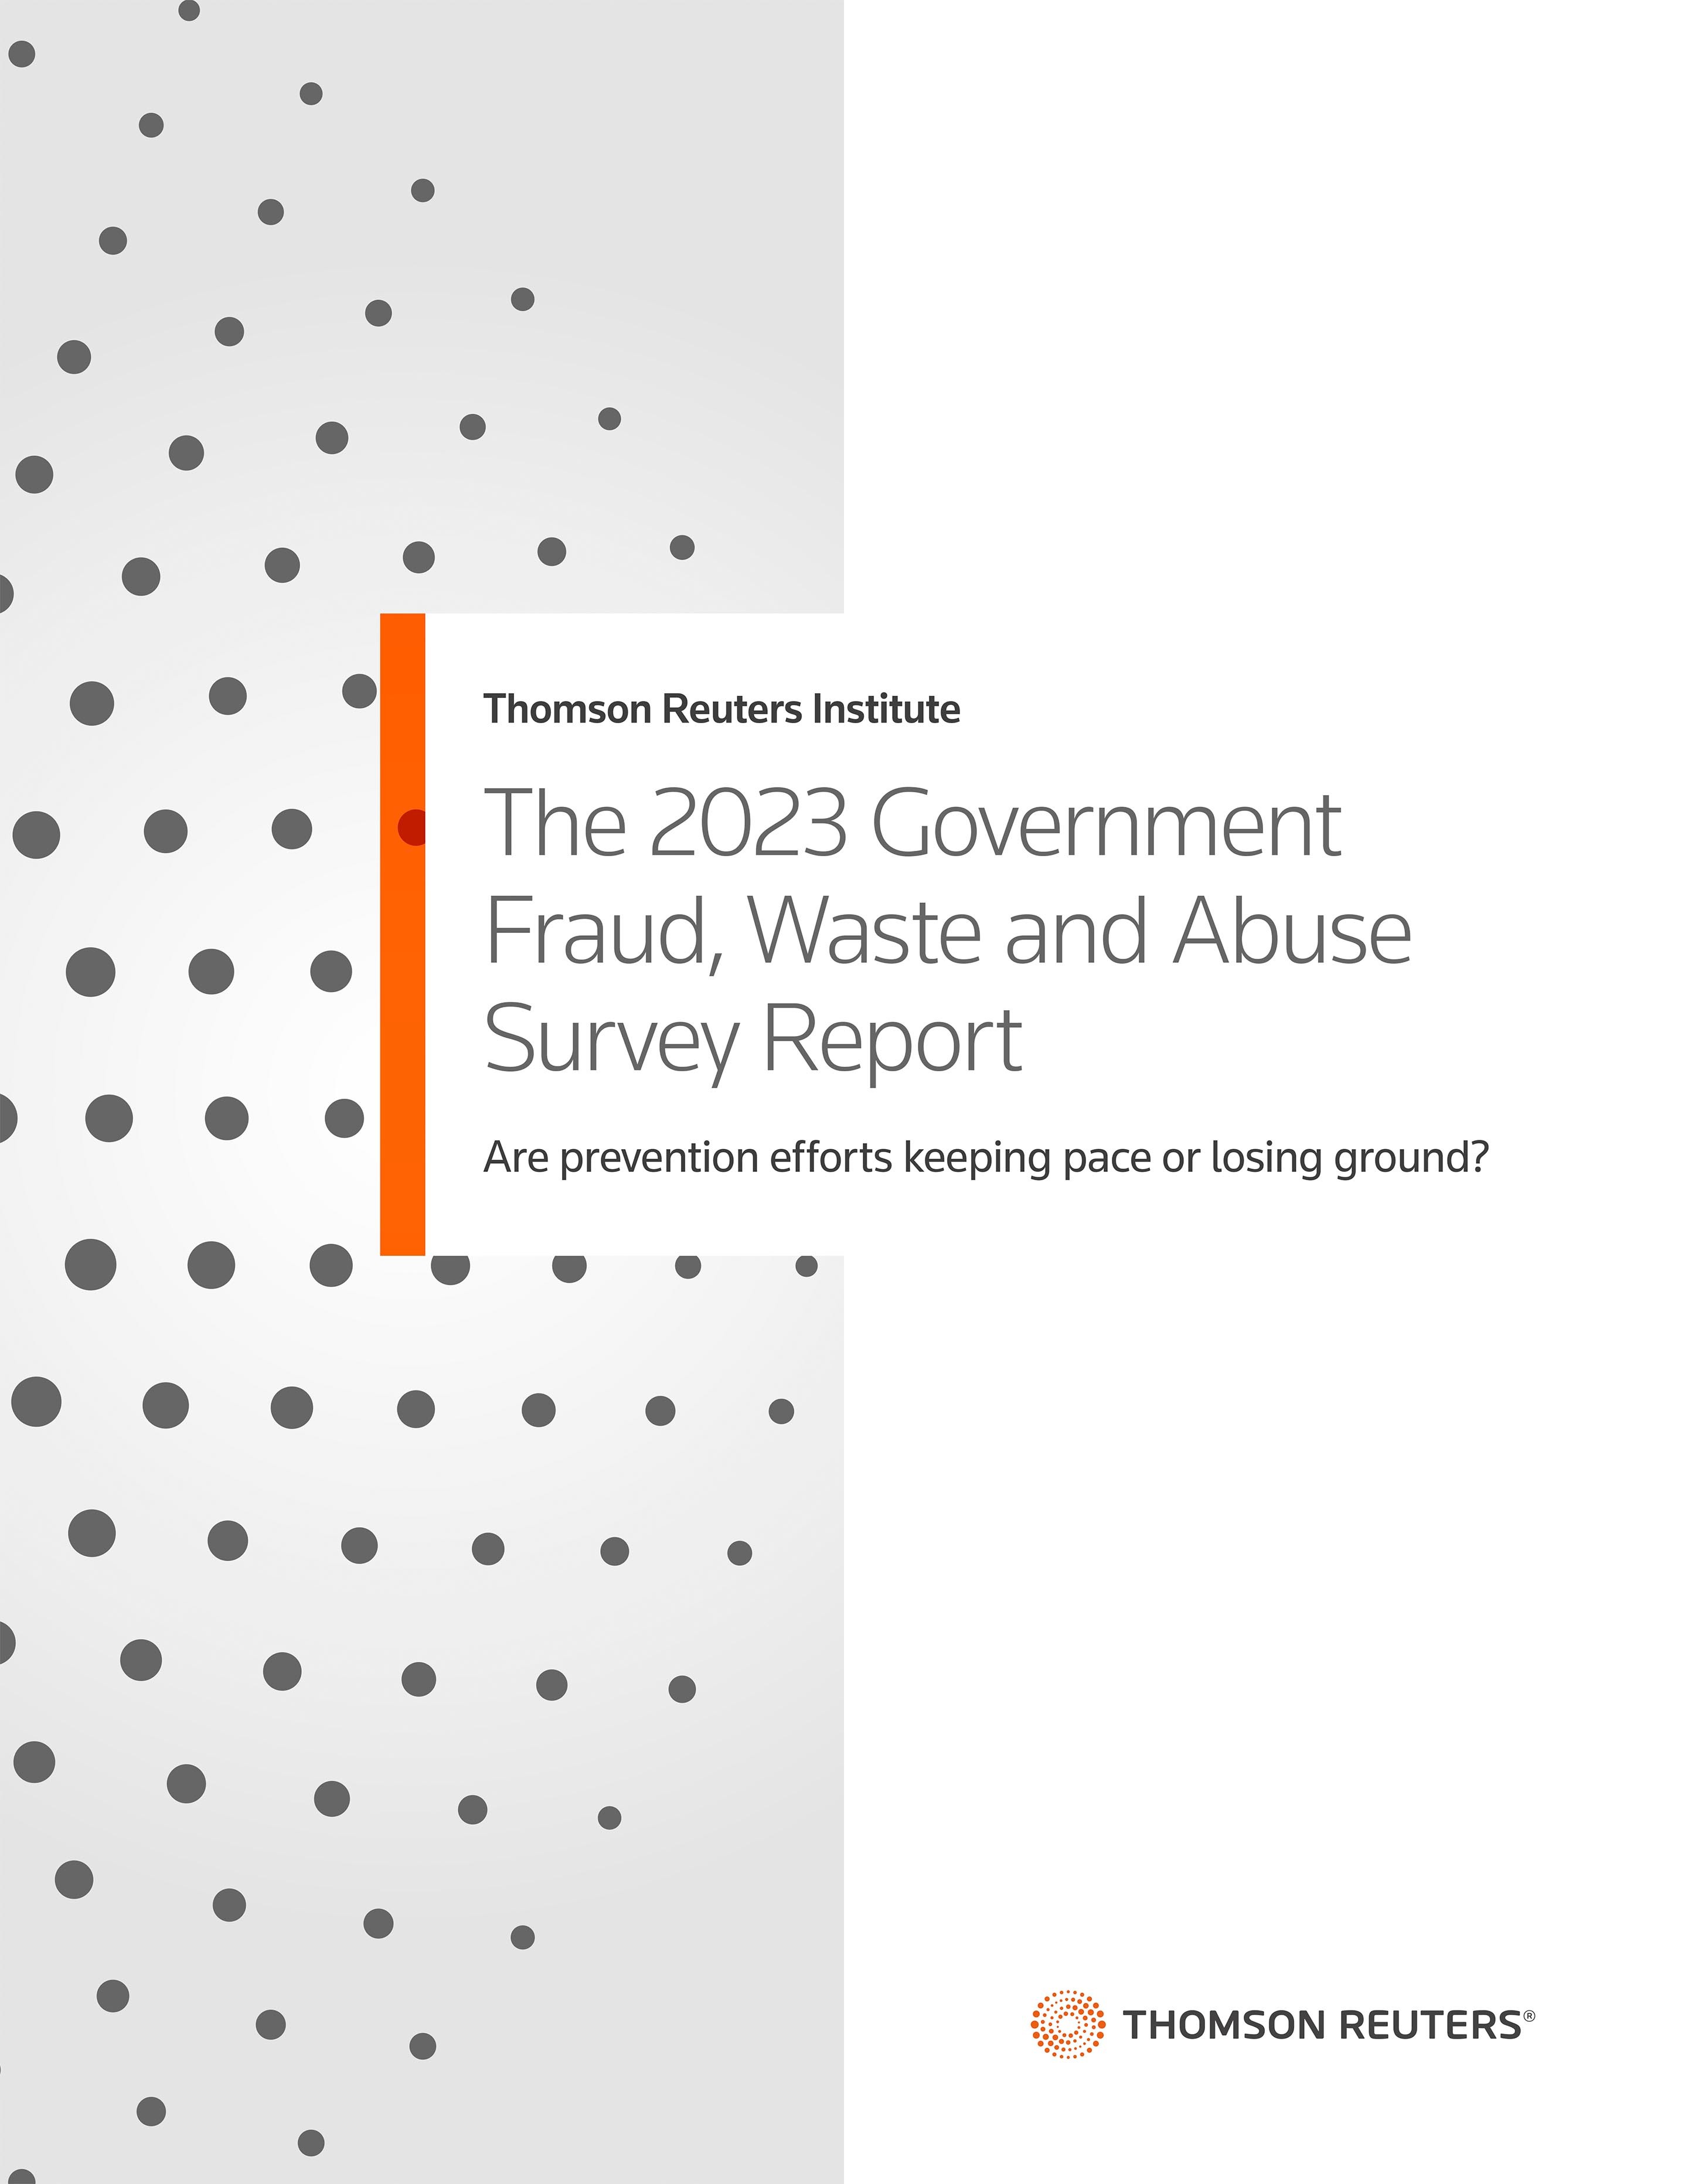 2023 government fraud, waste, and abuse survey report